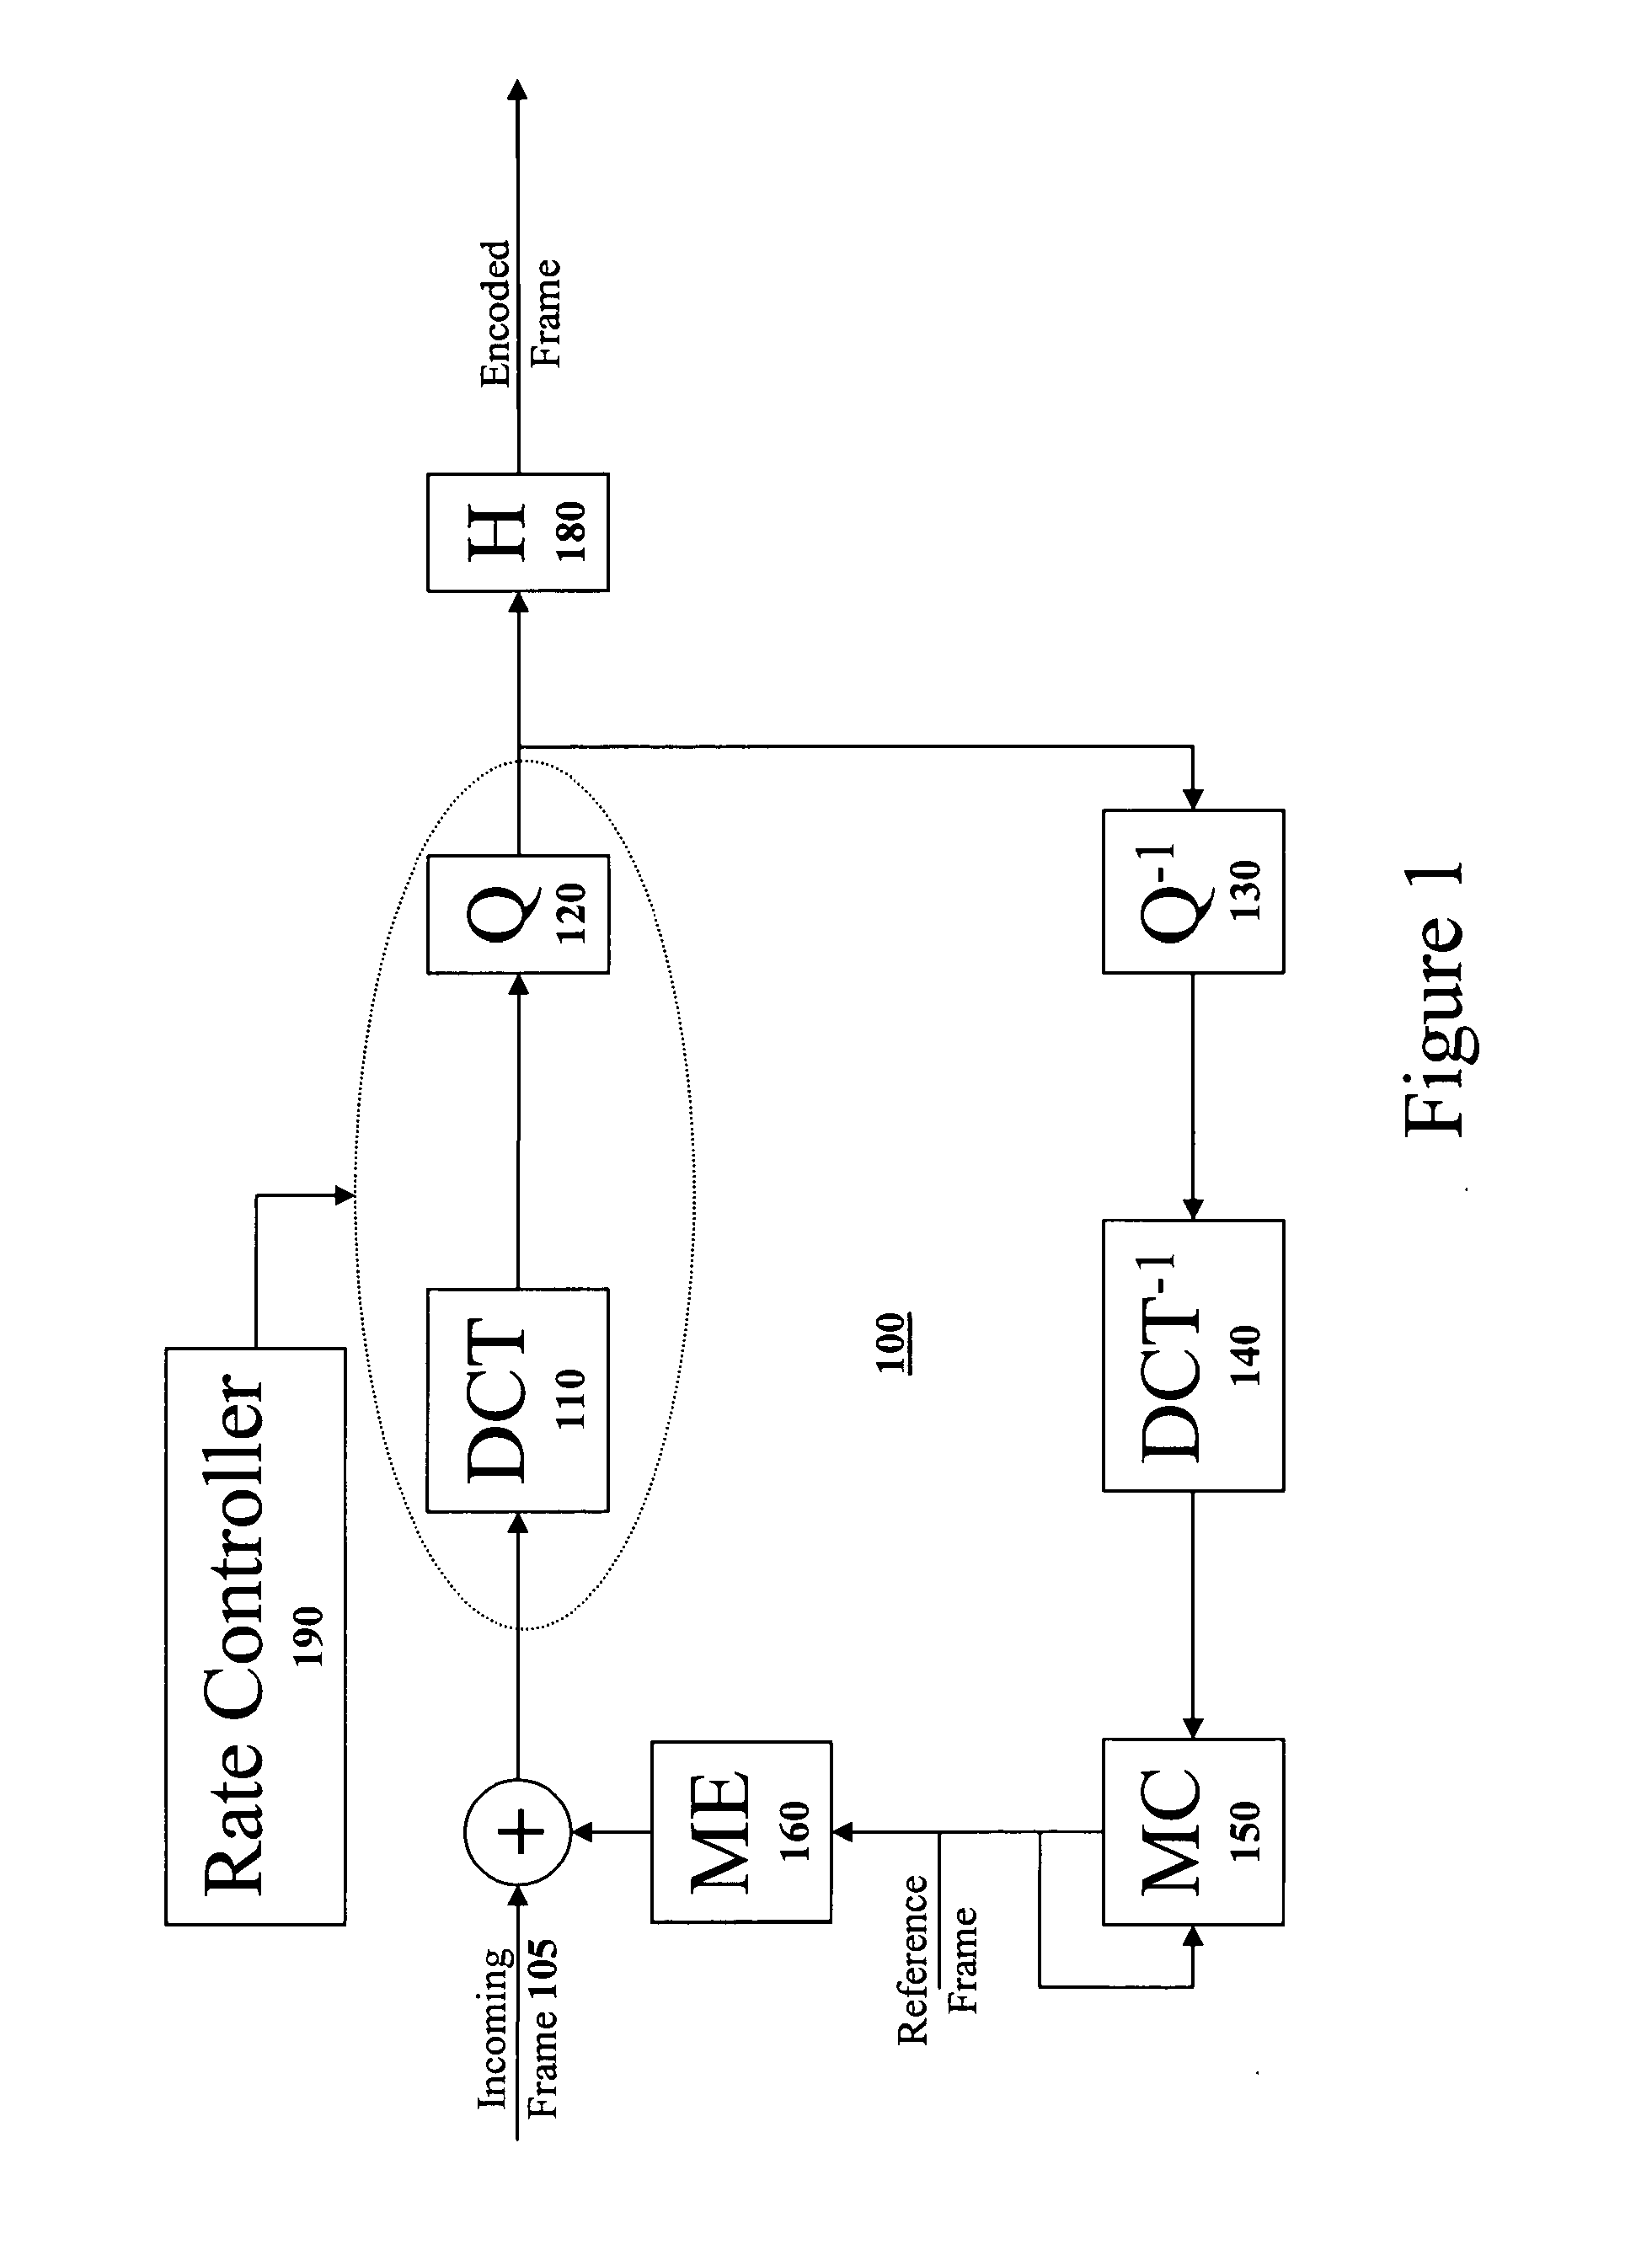 Method of implementing improved rate control for a multimedia compression and encoding system